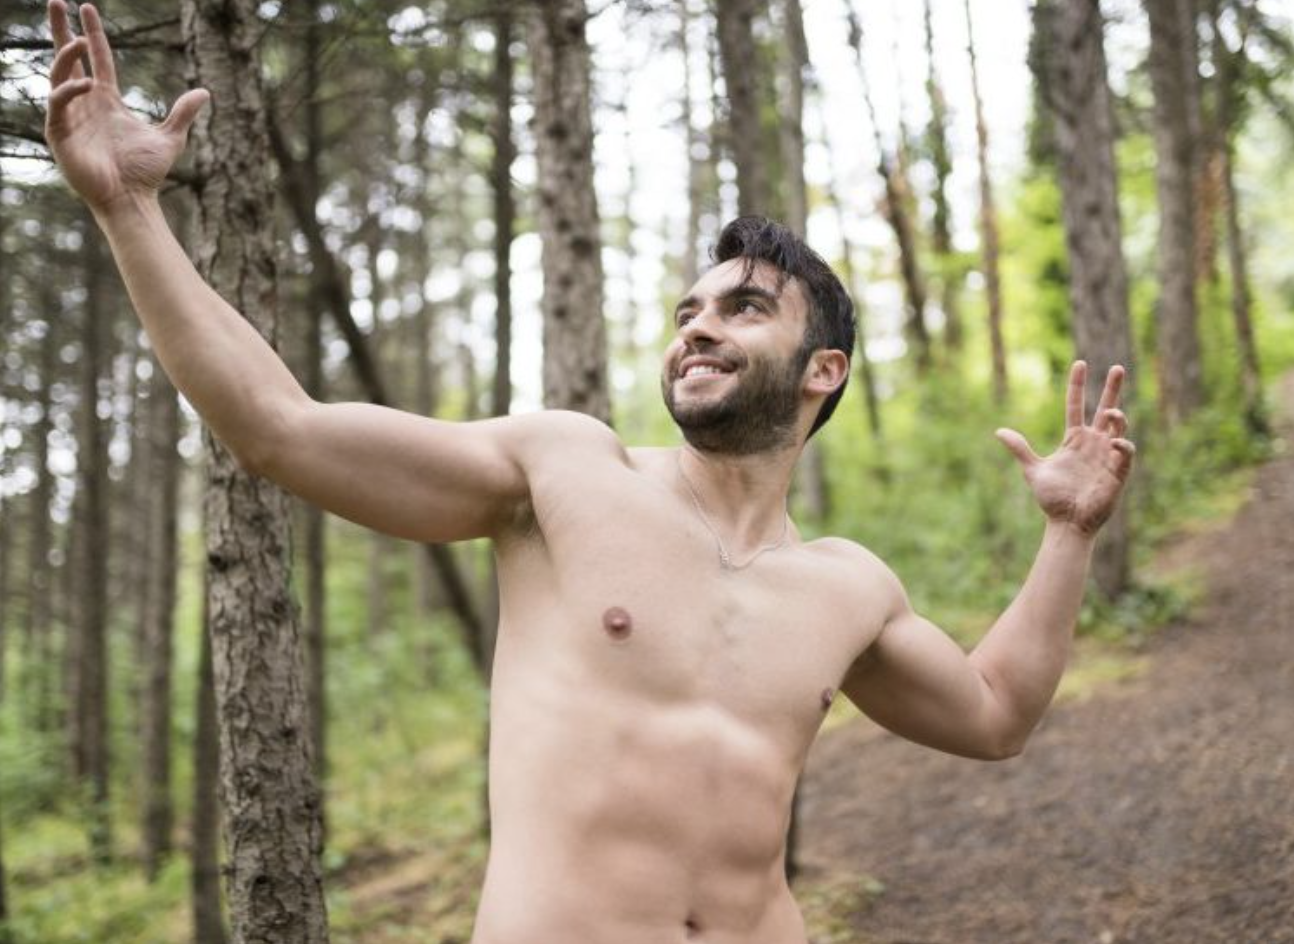 11. Meanwhile in England: Naked Revelers Overtake Sherwood Forest, Bring Graphic New Meaning to the Term Merry Men